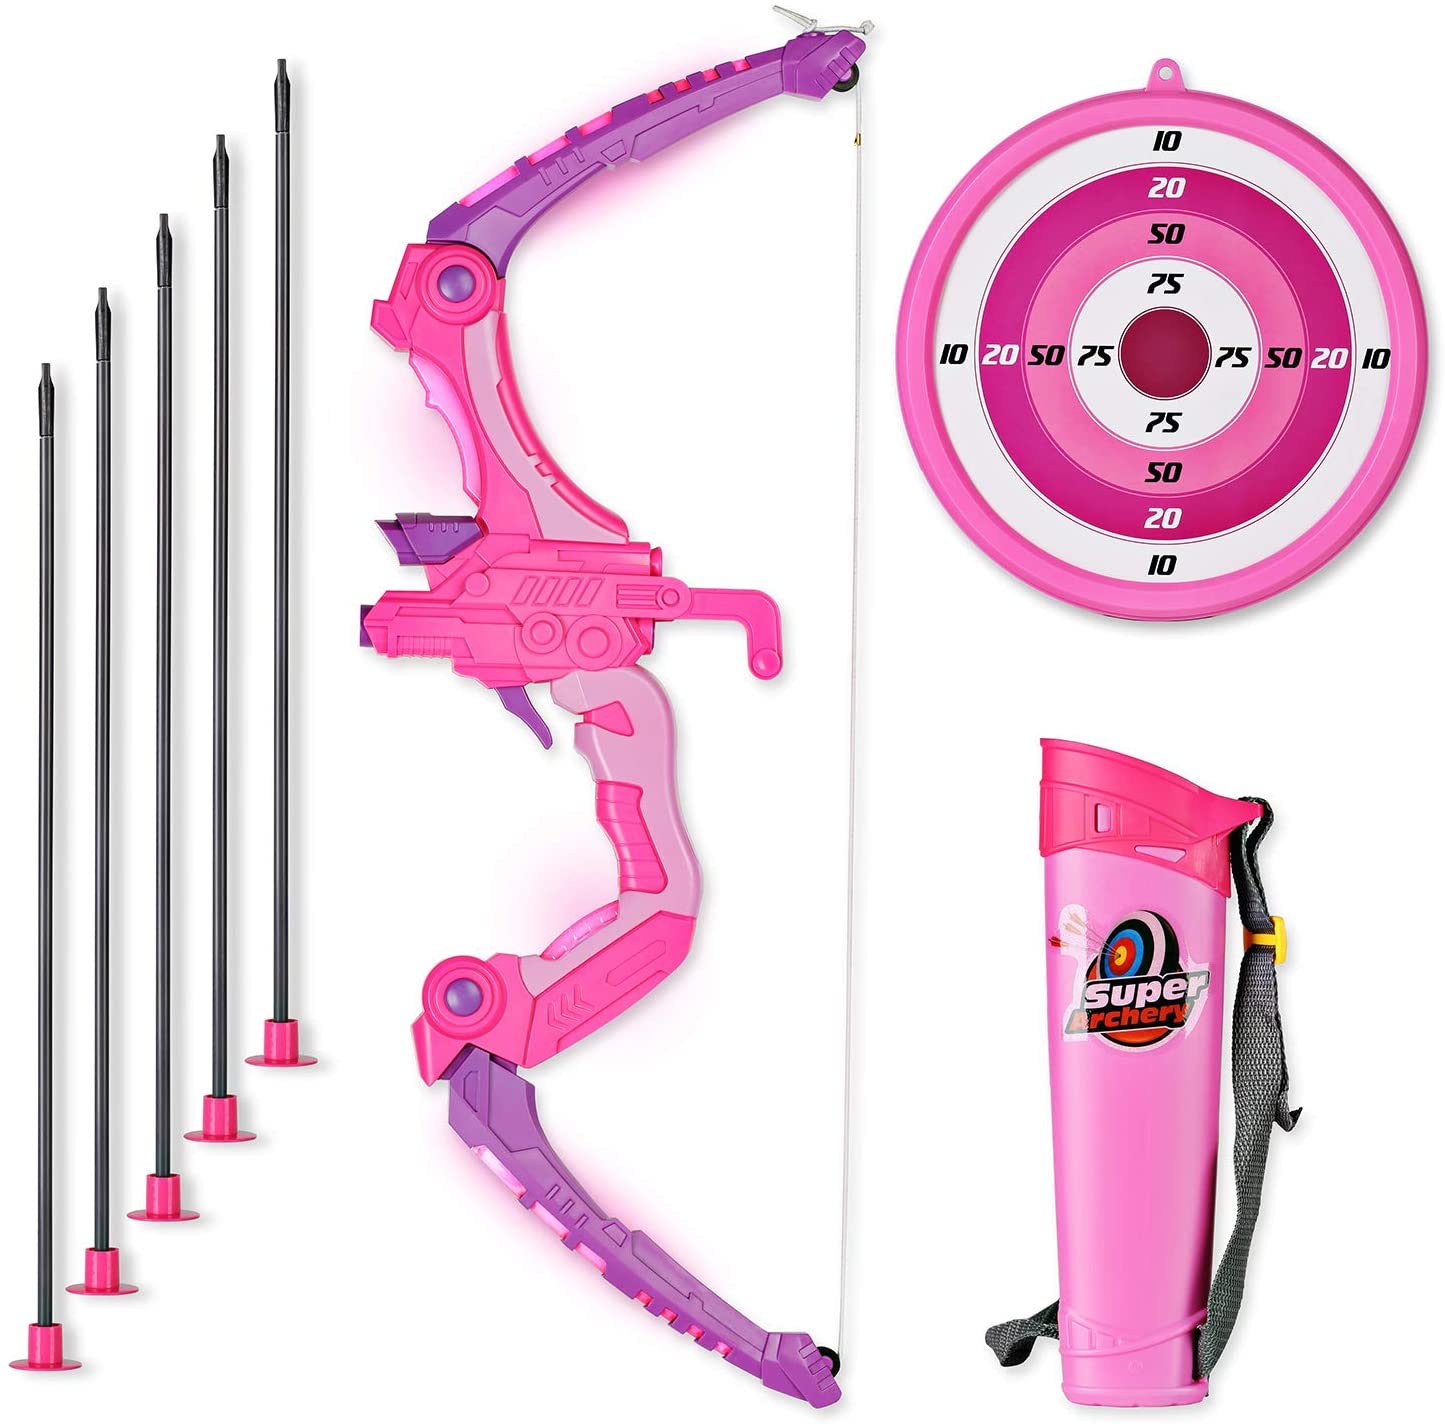 SainSmart Jr. Kids Bow and Arrows, Light Up Archery Set for Kids Outdoor Hunting Game with 5 Durable Suction Cup Arrows, Luminous Bow and Sighting Device, Pink - image 2 of 3